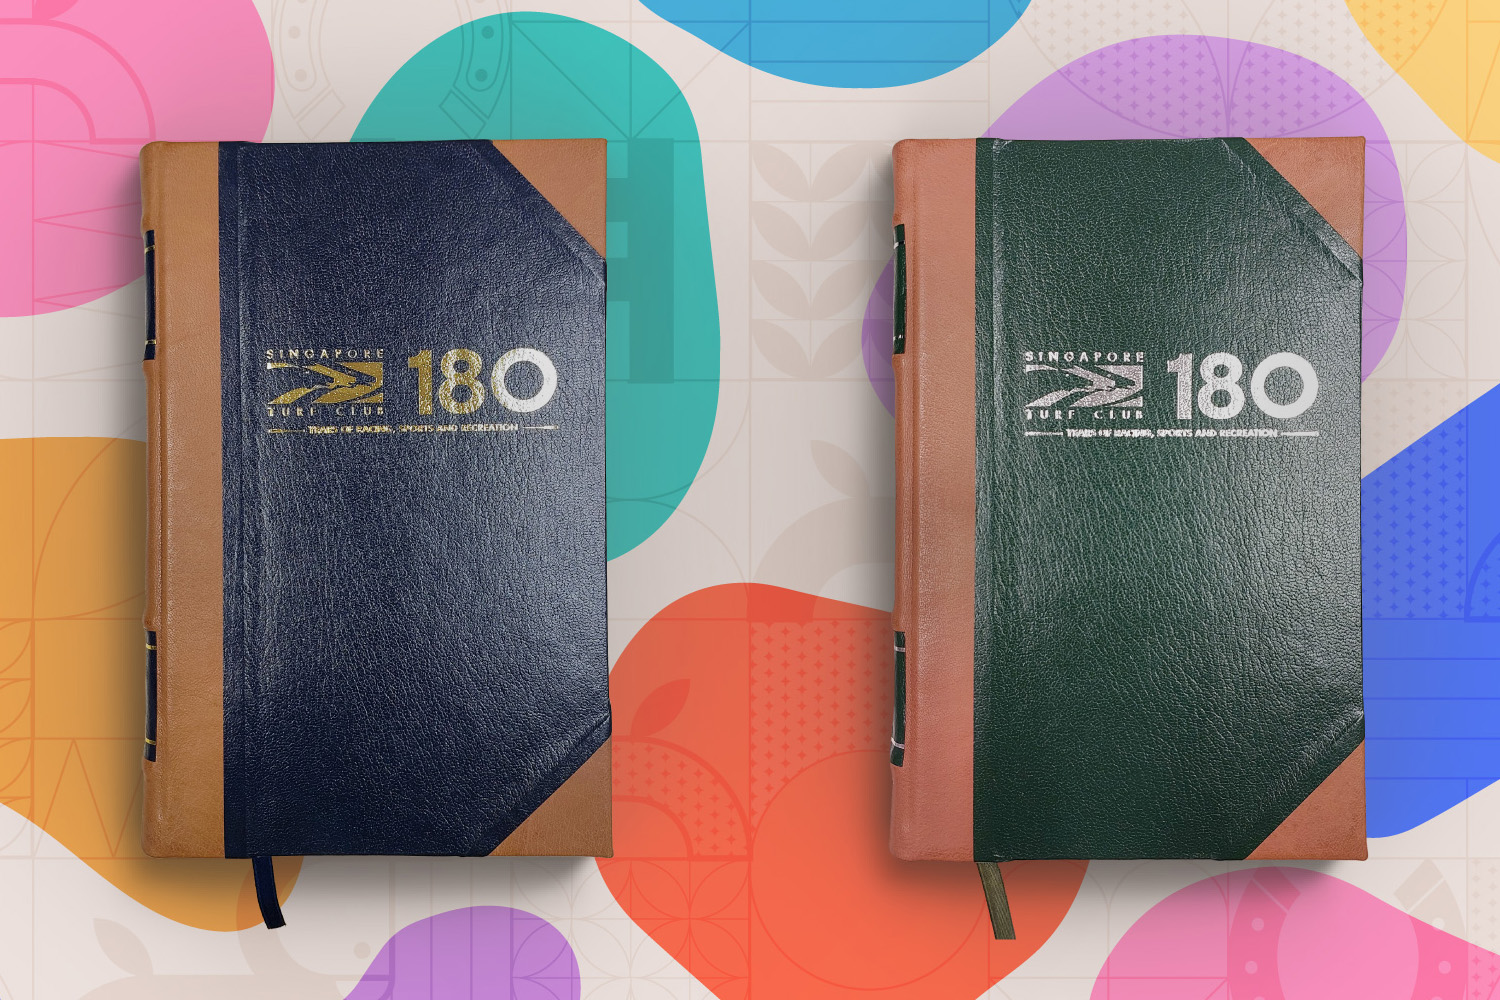 2 customised half-leather bound journals in blue on the left and green on the right.